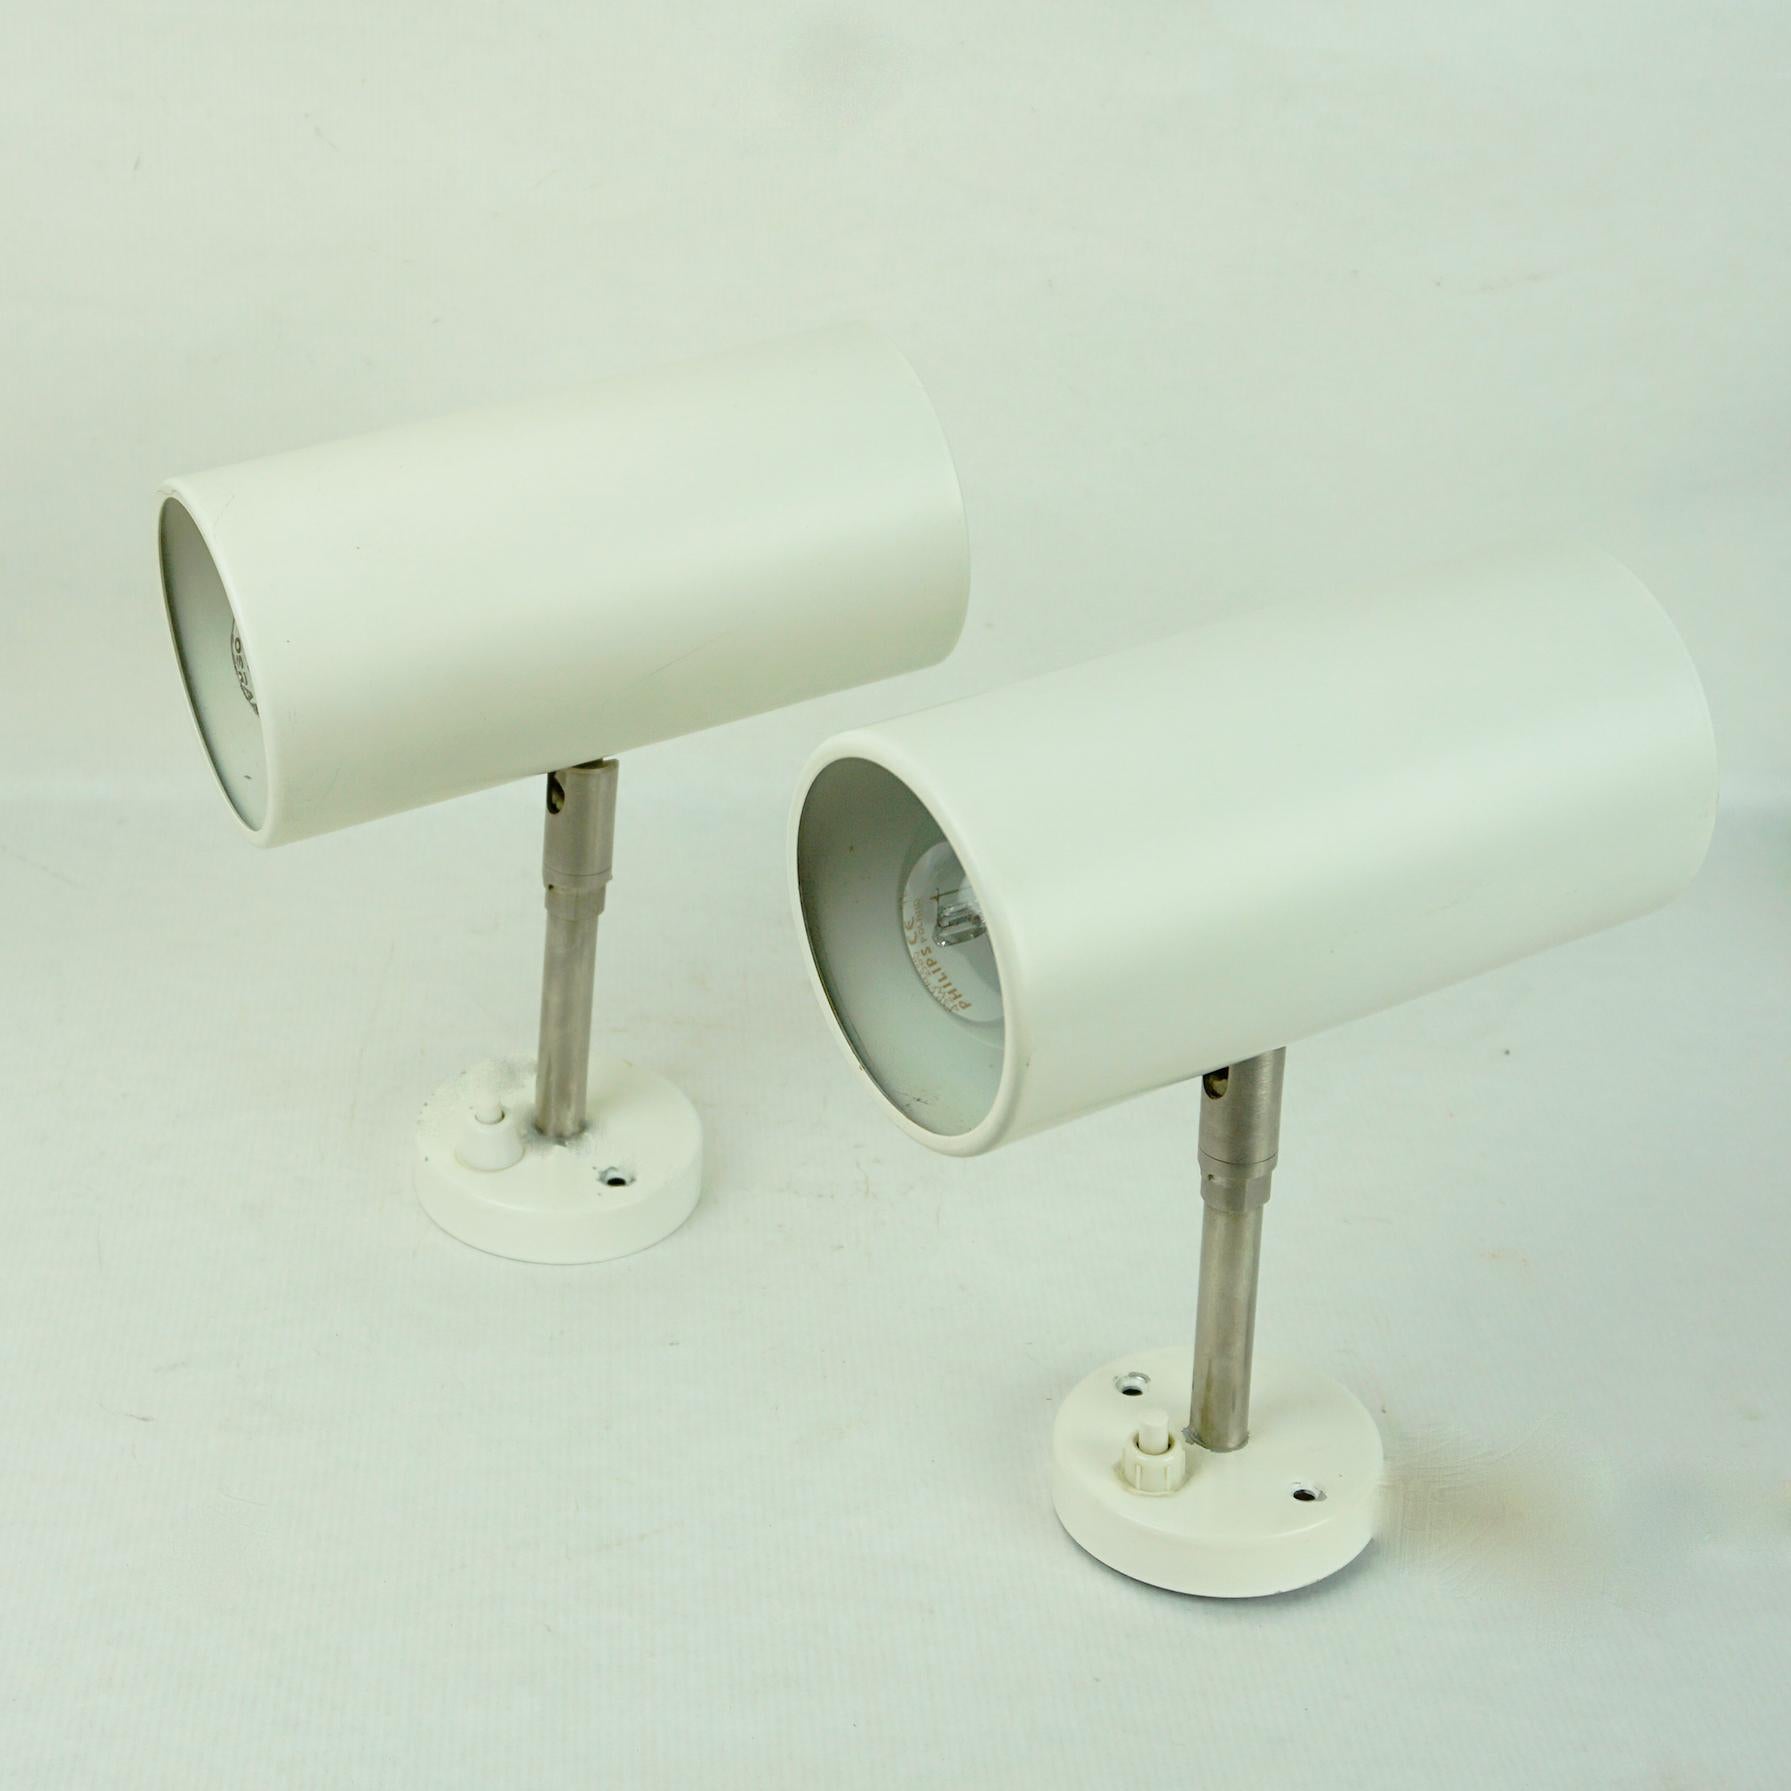 This minimalistic and pure Austrian Midcentury zylindrical pair of wall lights were designed and manufactured by J. T. Kalmar in the 1960s in Vienna Austria.
They feature zylindtical white lacquered metal shades on a stainless steel base. The shade